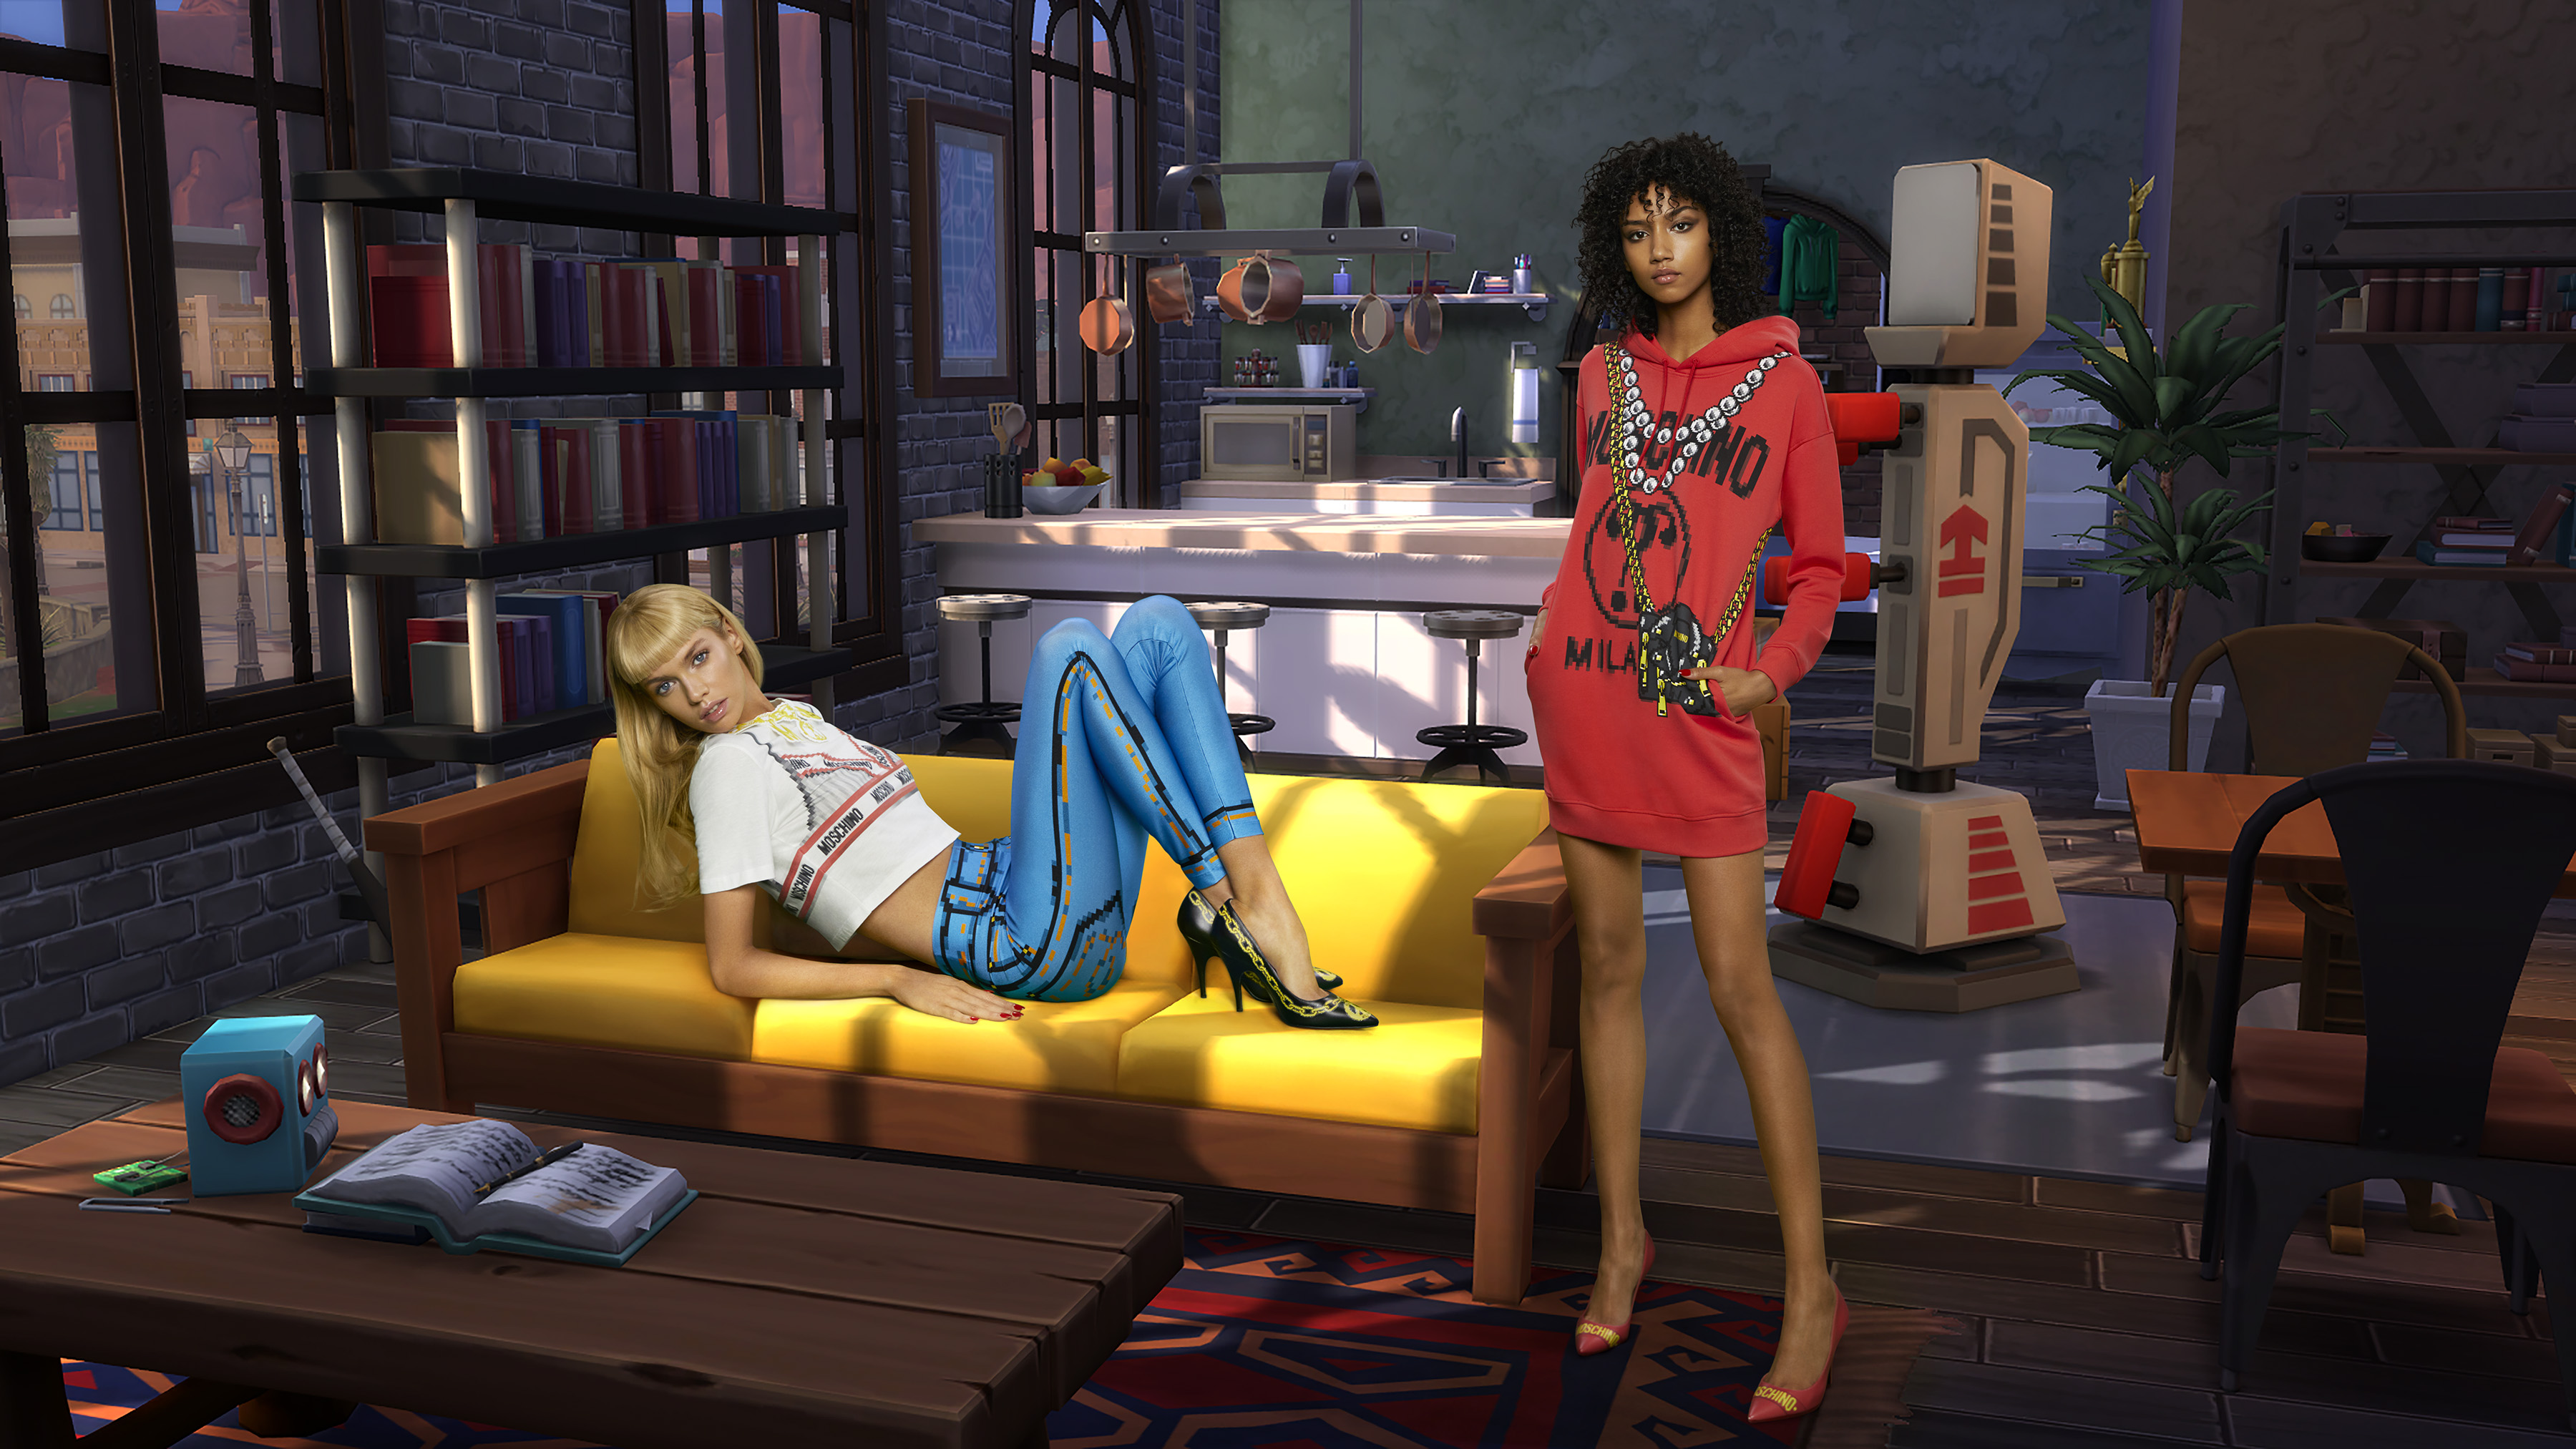 TheNinthWaveSims: The Sims 2 - The Sims 4 Moschino Stuff Fashion Objects  Set For The Sims 2